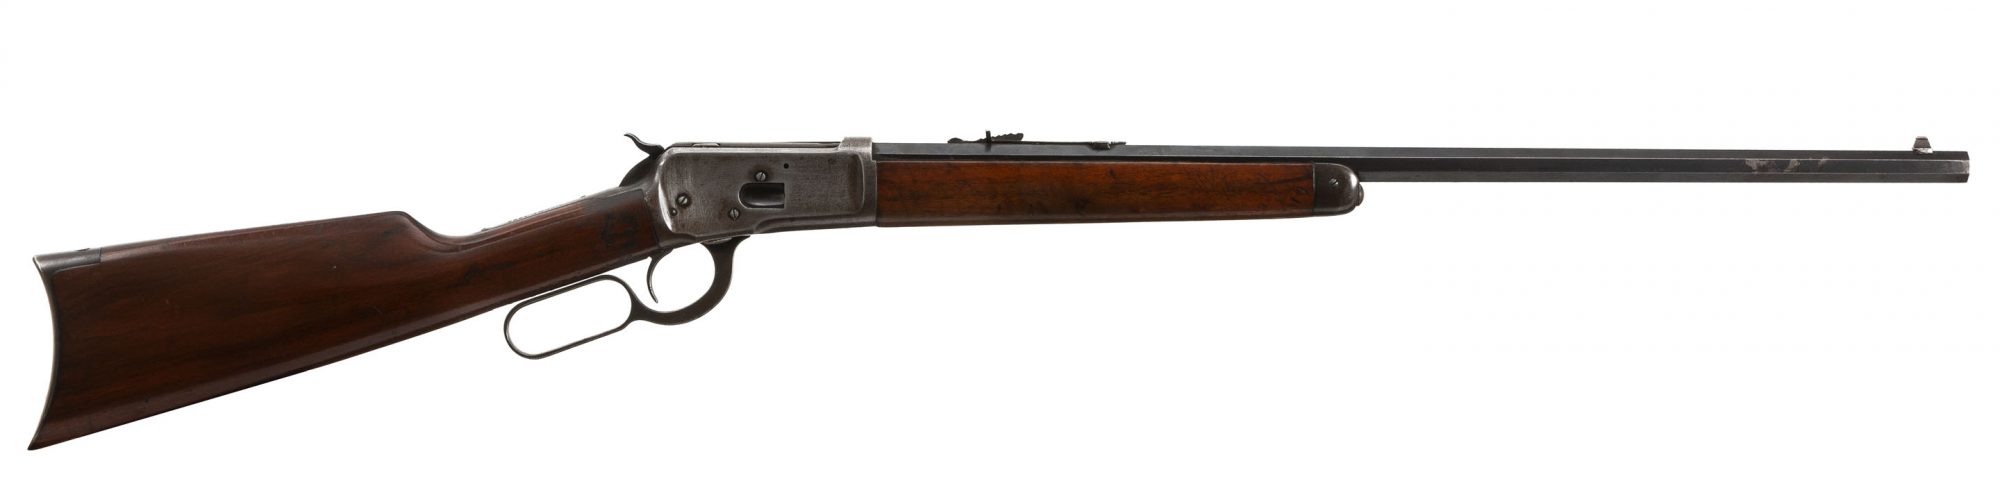 Photo of a Winchester 1892 from 1918, for sale by Turnbull Restoration of Bloomfield, NY